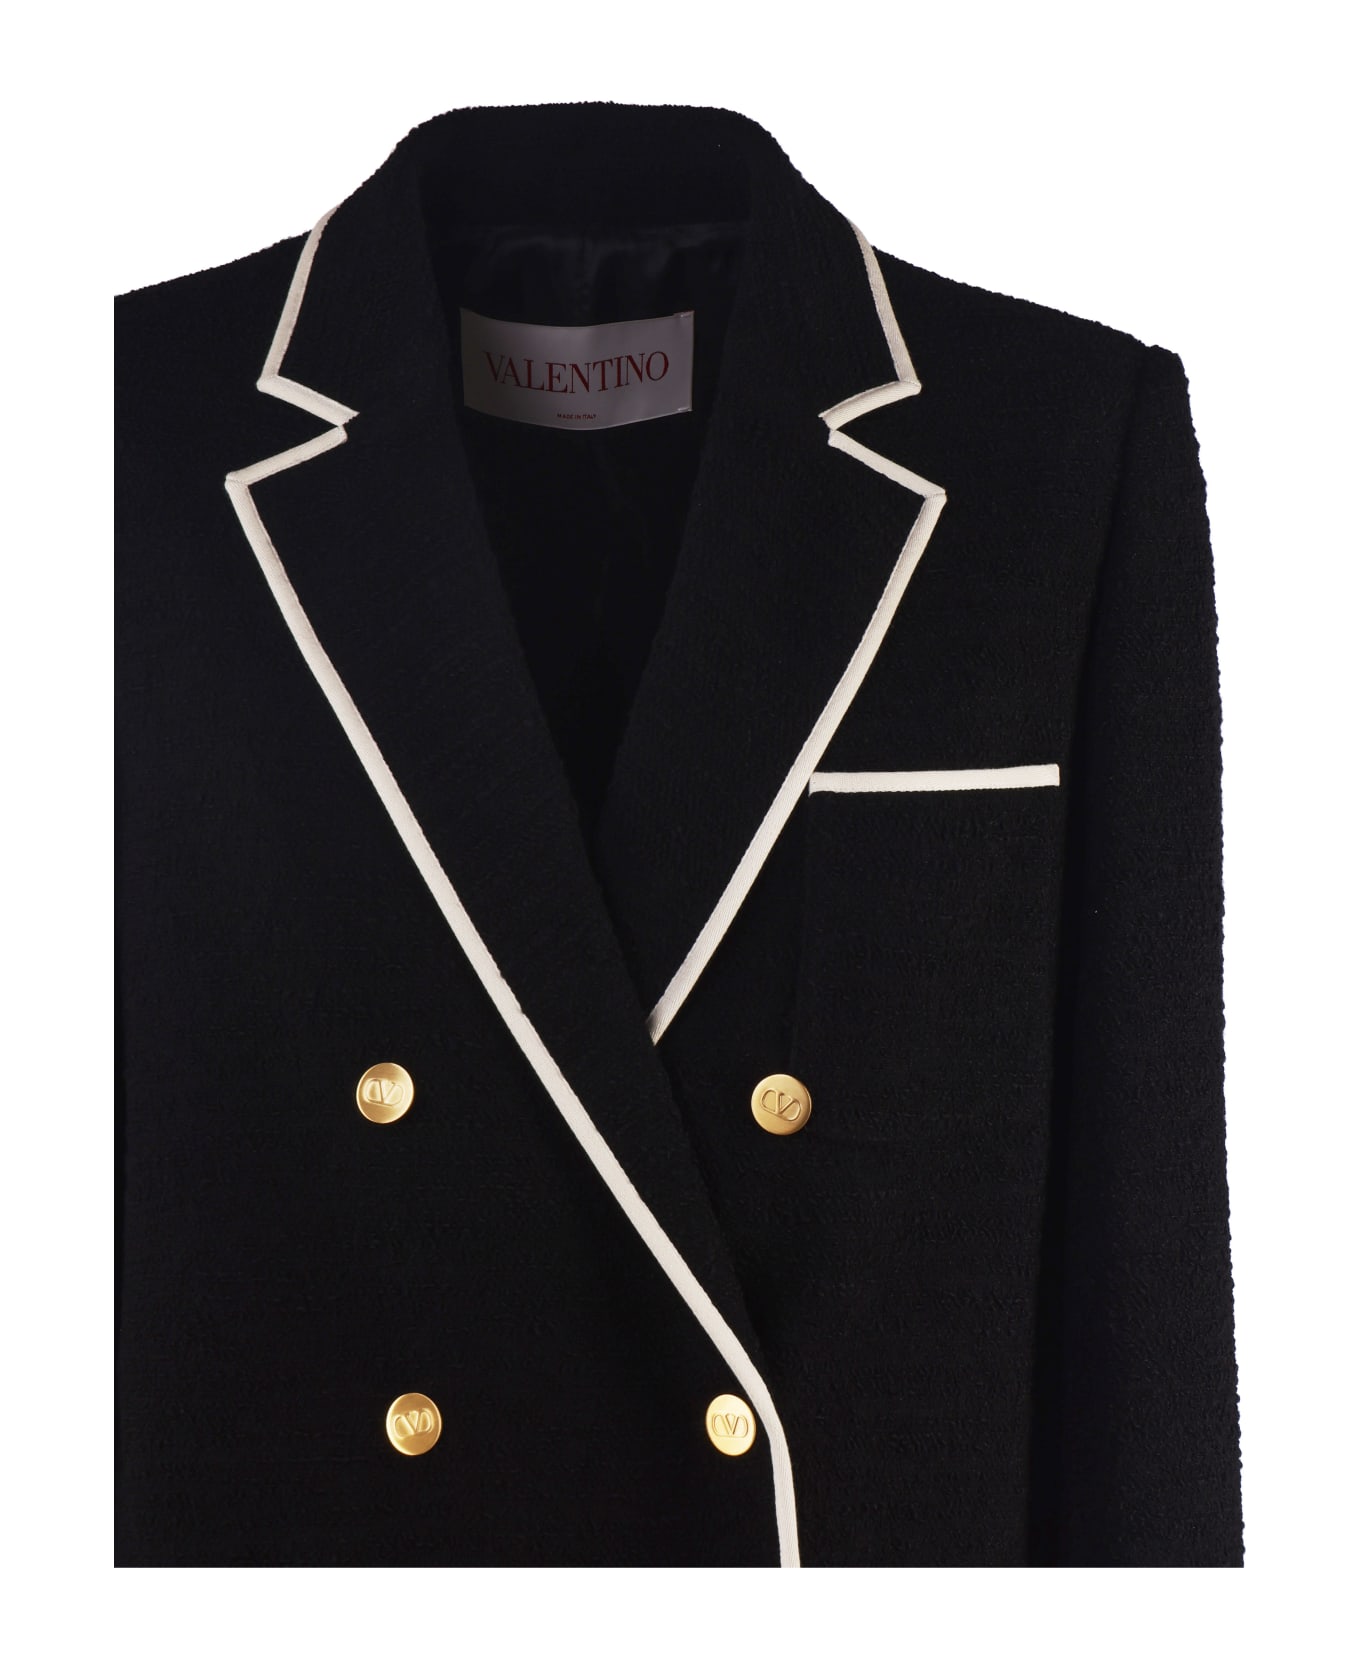 Valentino Rouches Double-breasted Tweed Jacket - Black, ivory